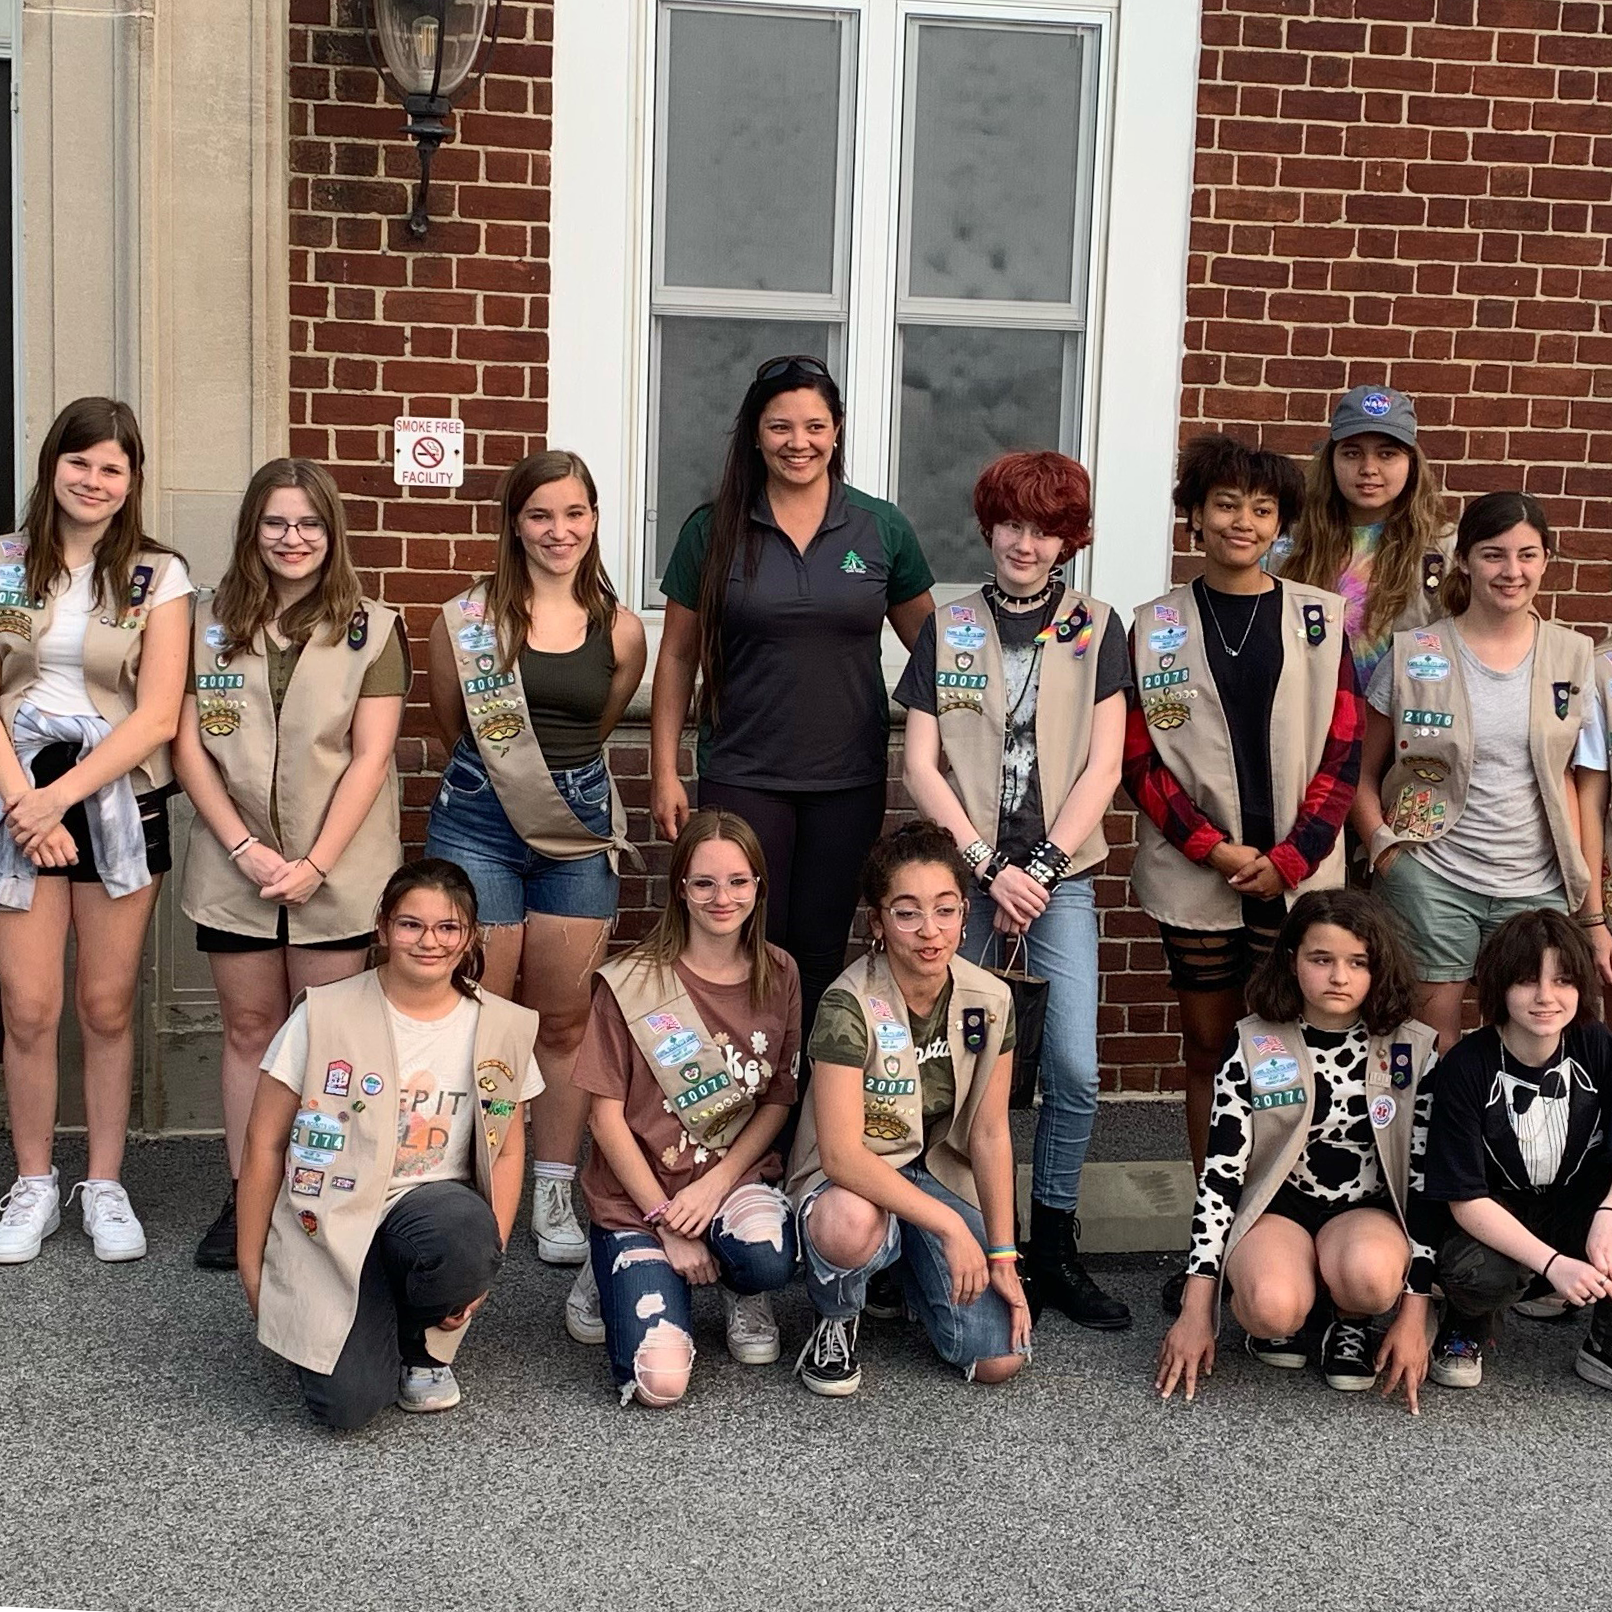 Photograph of York Water employee Katrina with a group of smiling Girl Scouts